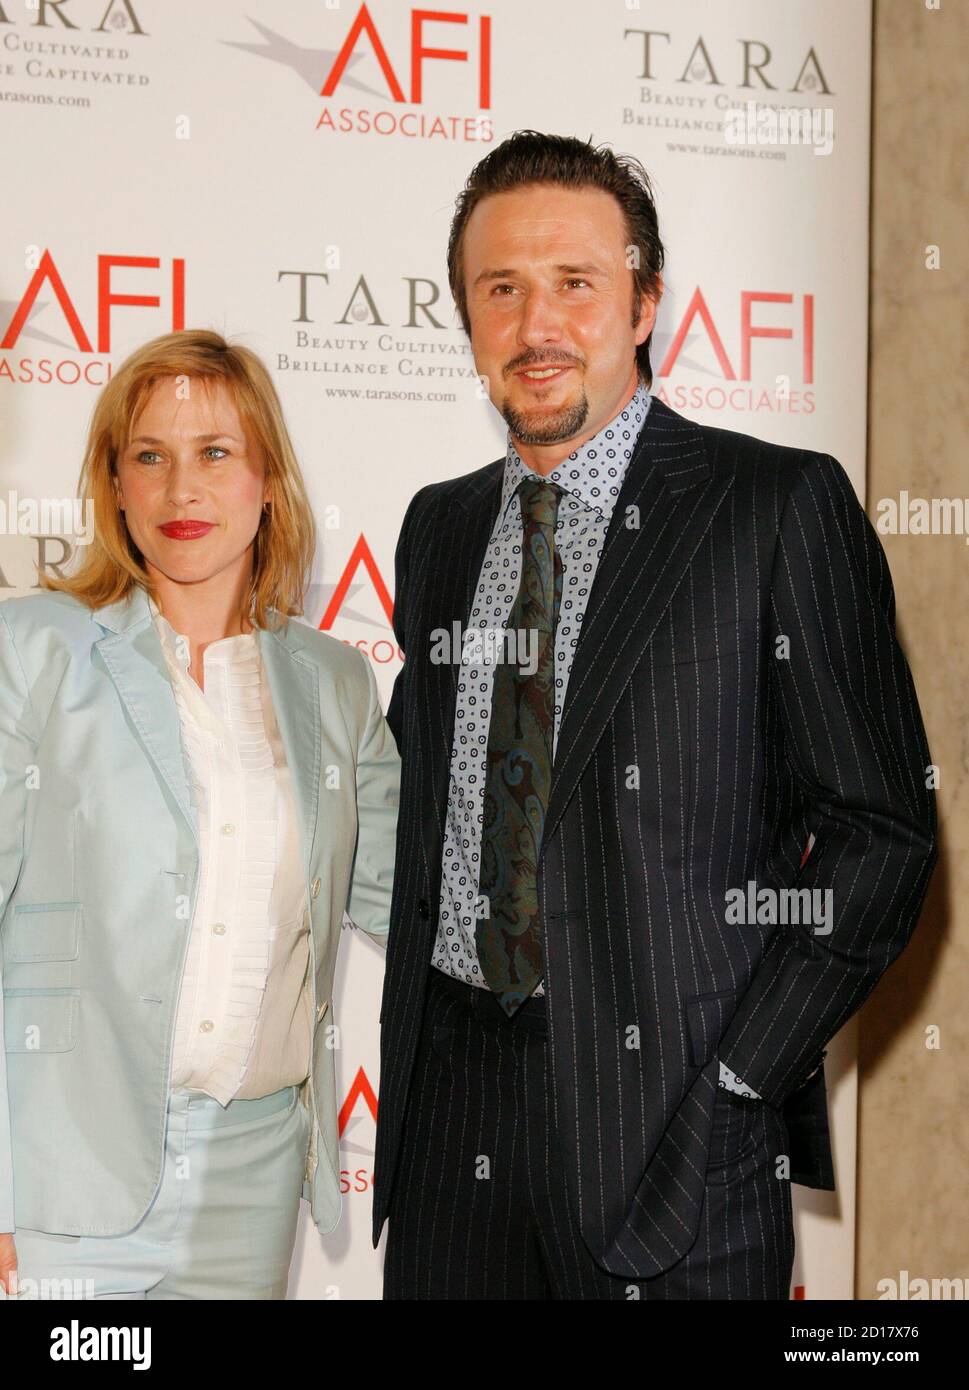 David Arquette And Patricia Arquette High Resolution Stock Photography And Images Alamy